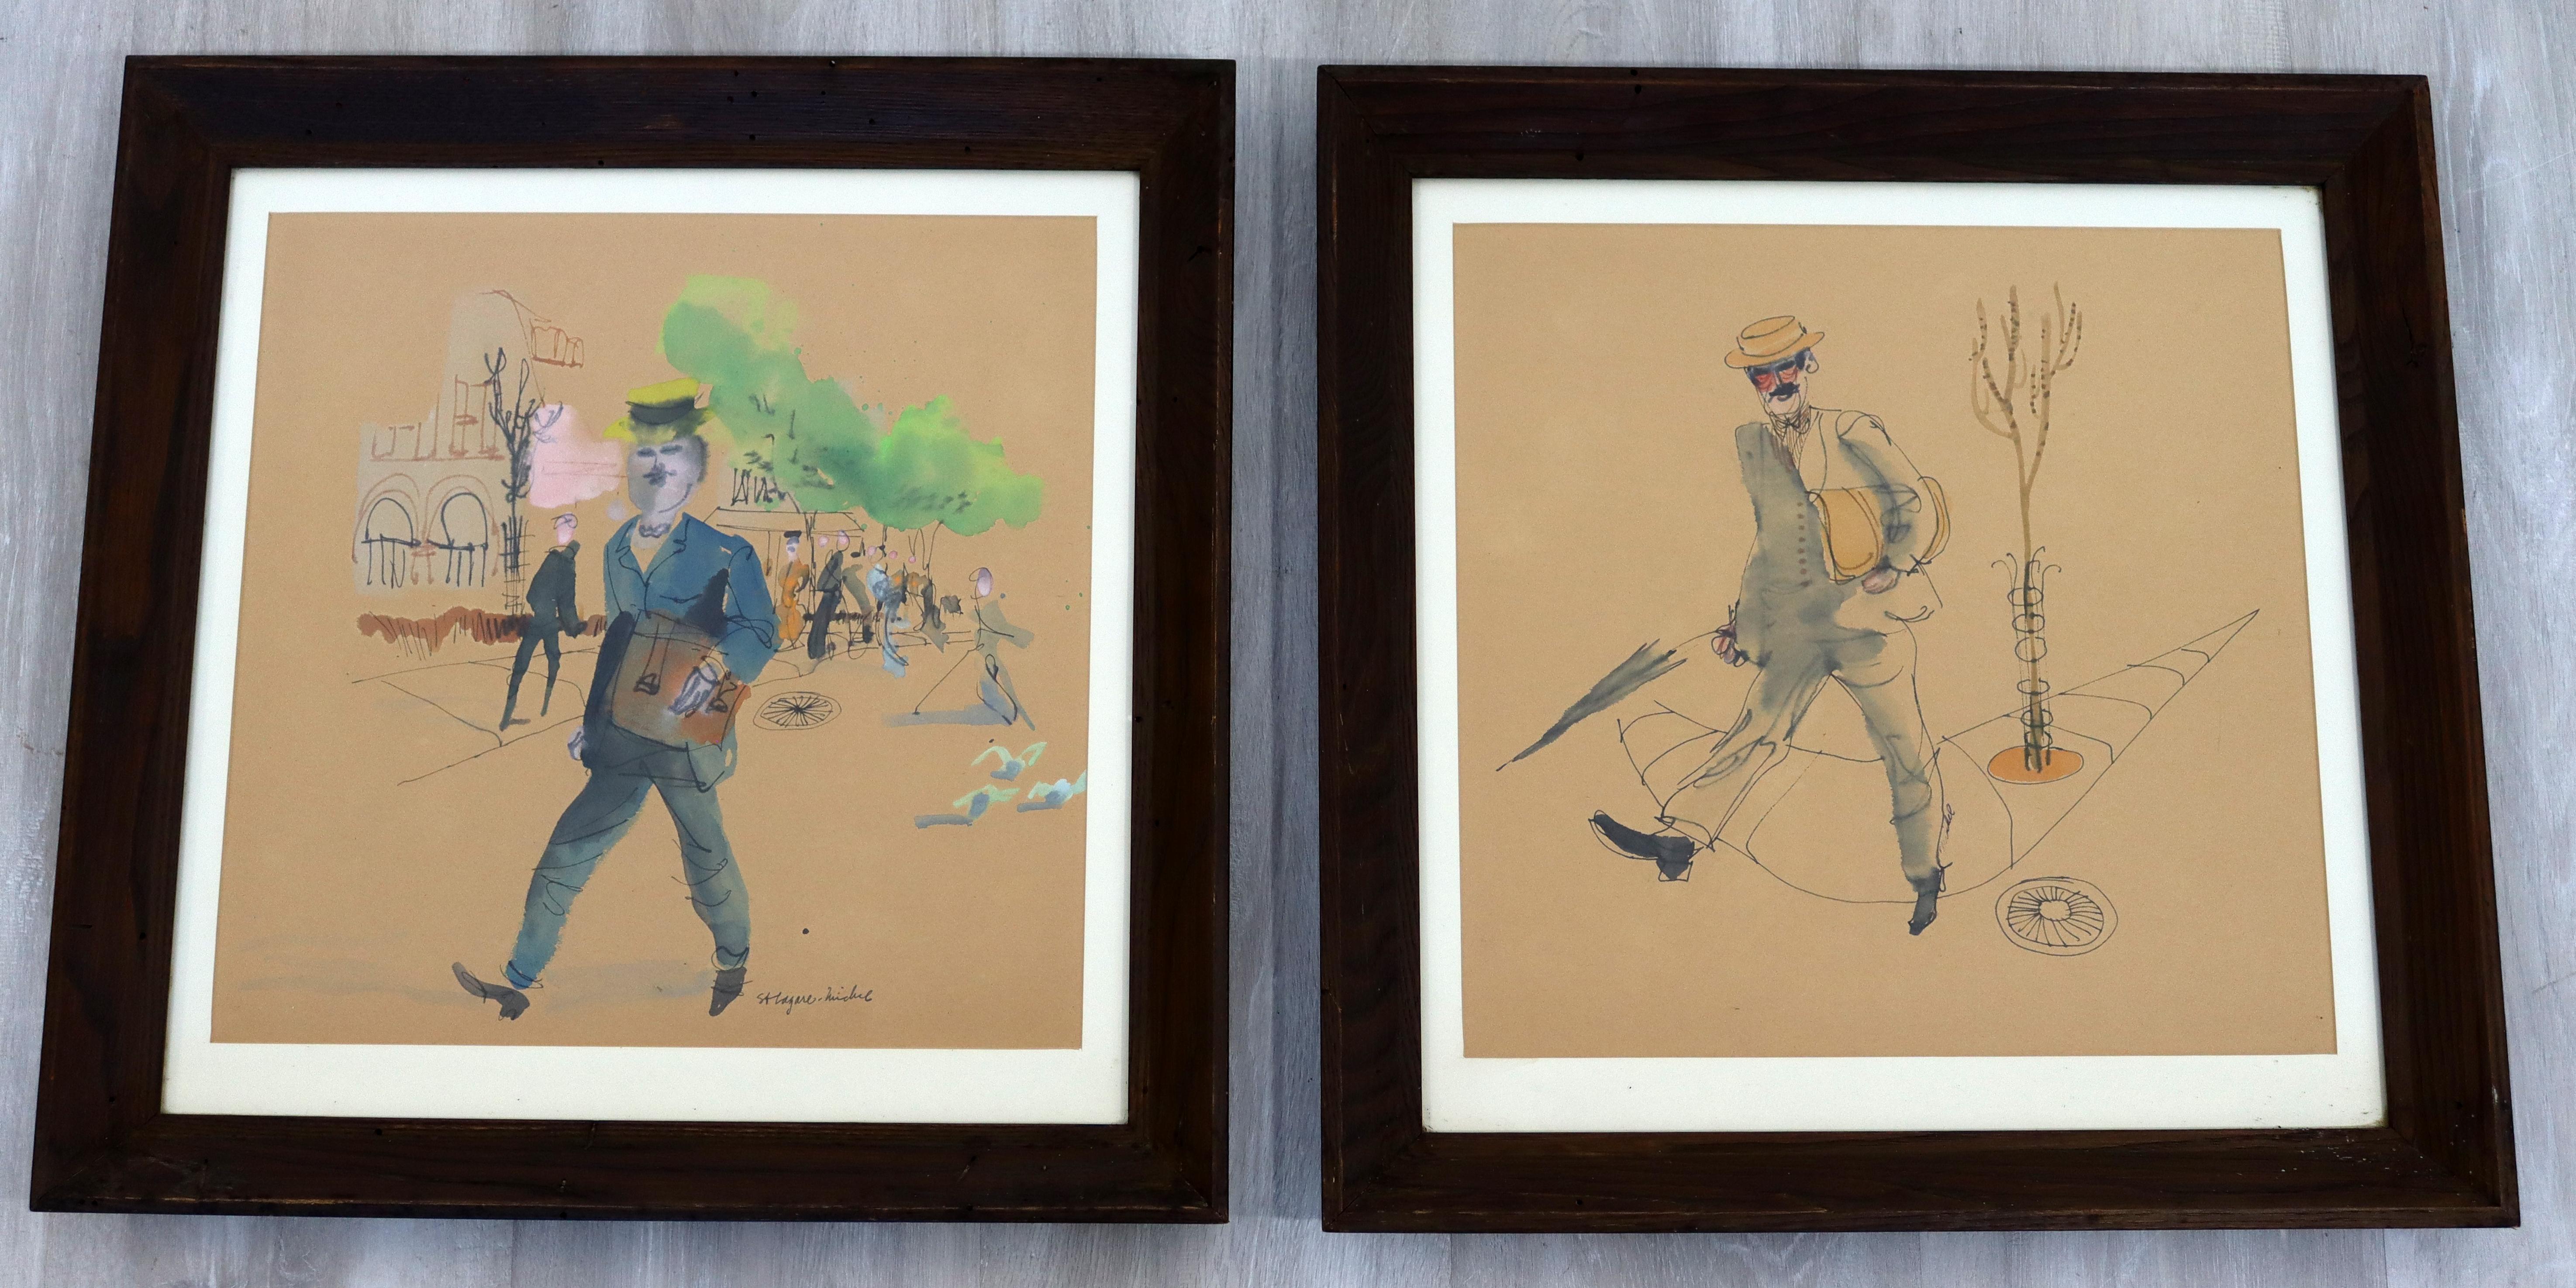 For your consideration is a lovely, framed pair of watercolor paintings, signed St. Lagare-Michael. In excellent condition. The dimensions of each are 19